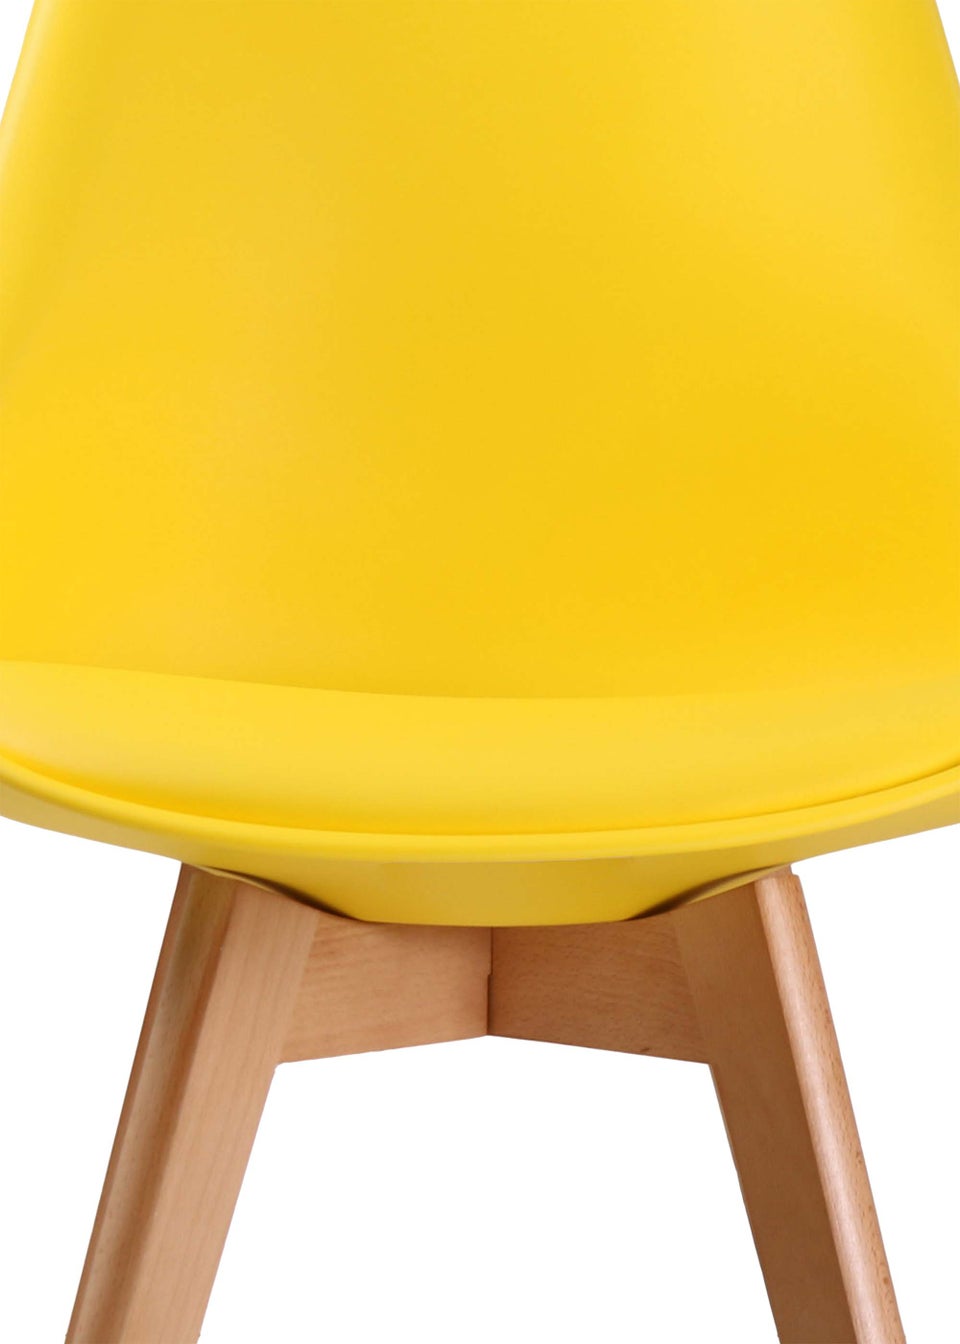 LPD Furniture Set of 2 Louvre Chairs Yellow